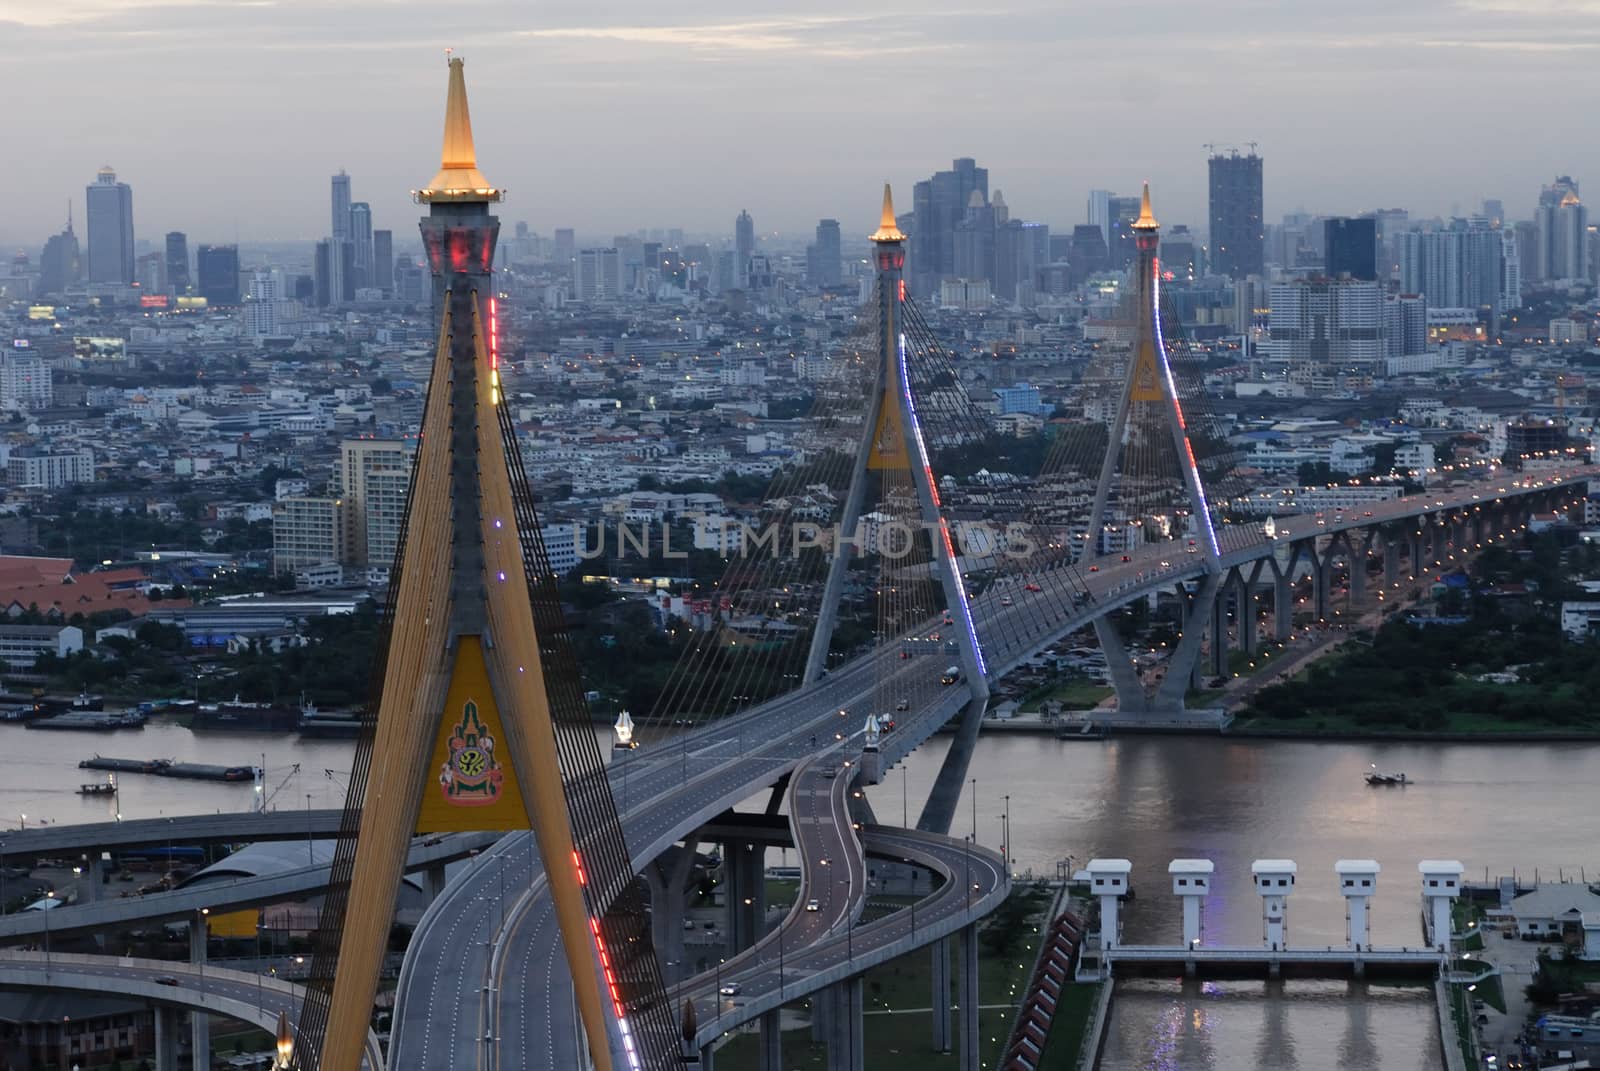 Bhumibol Bridge in Thailand, also known as the Industrial Ring R by think4photop